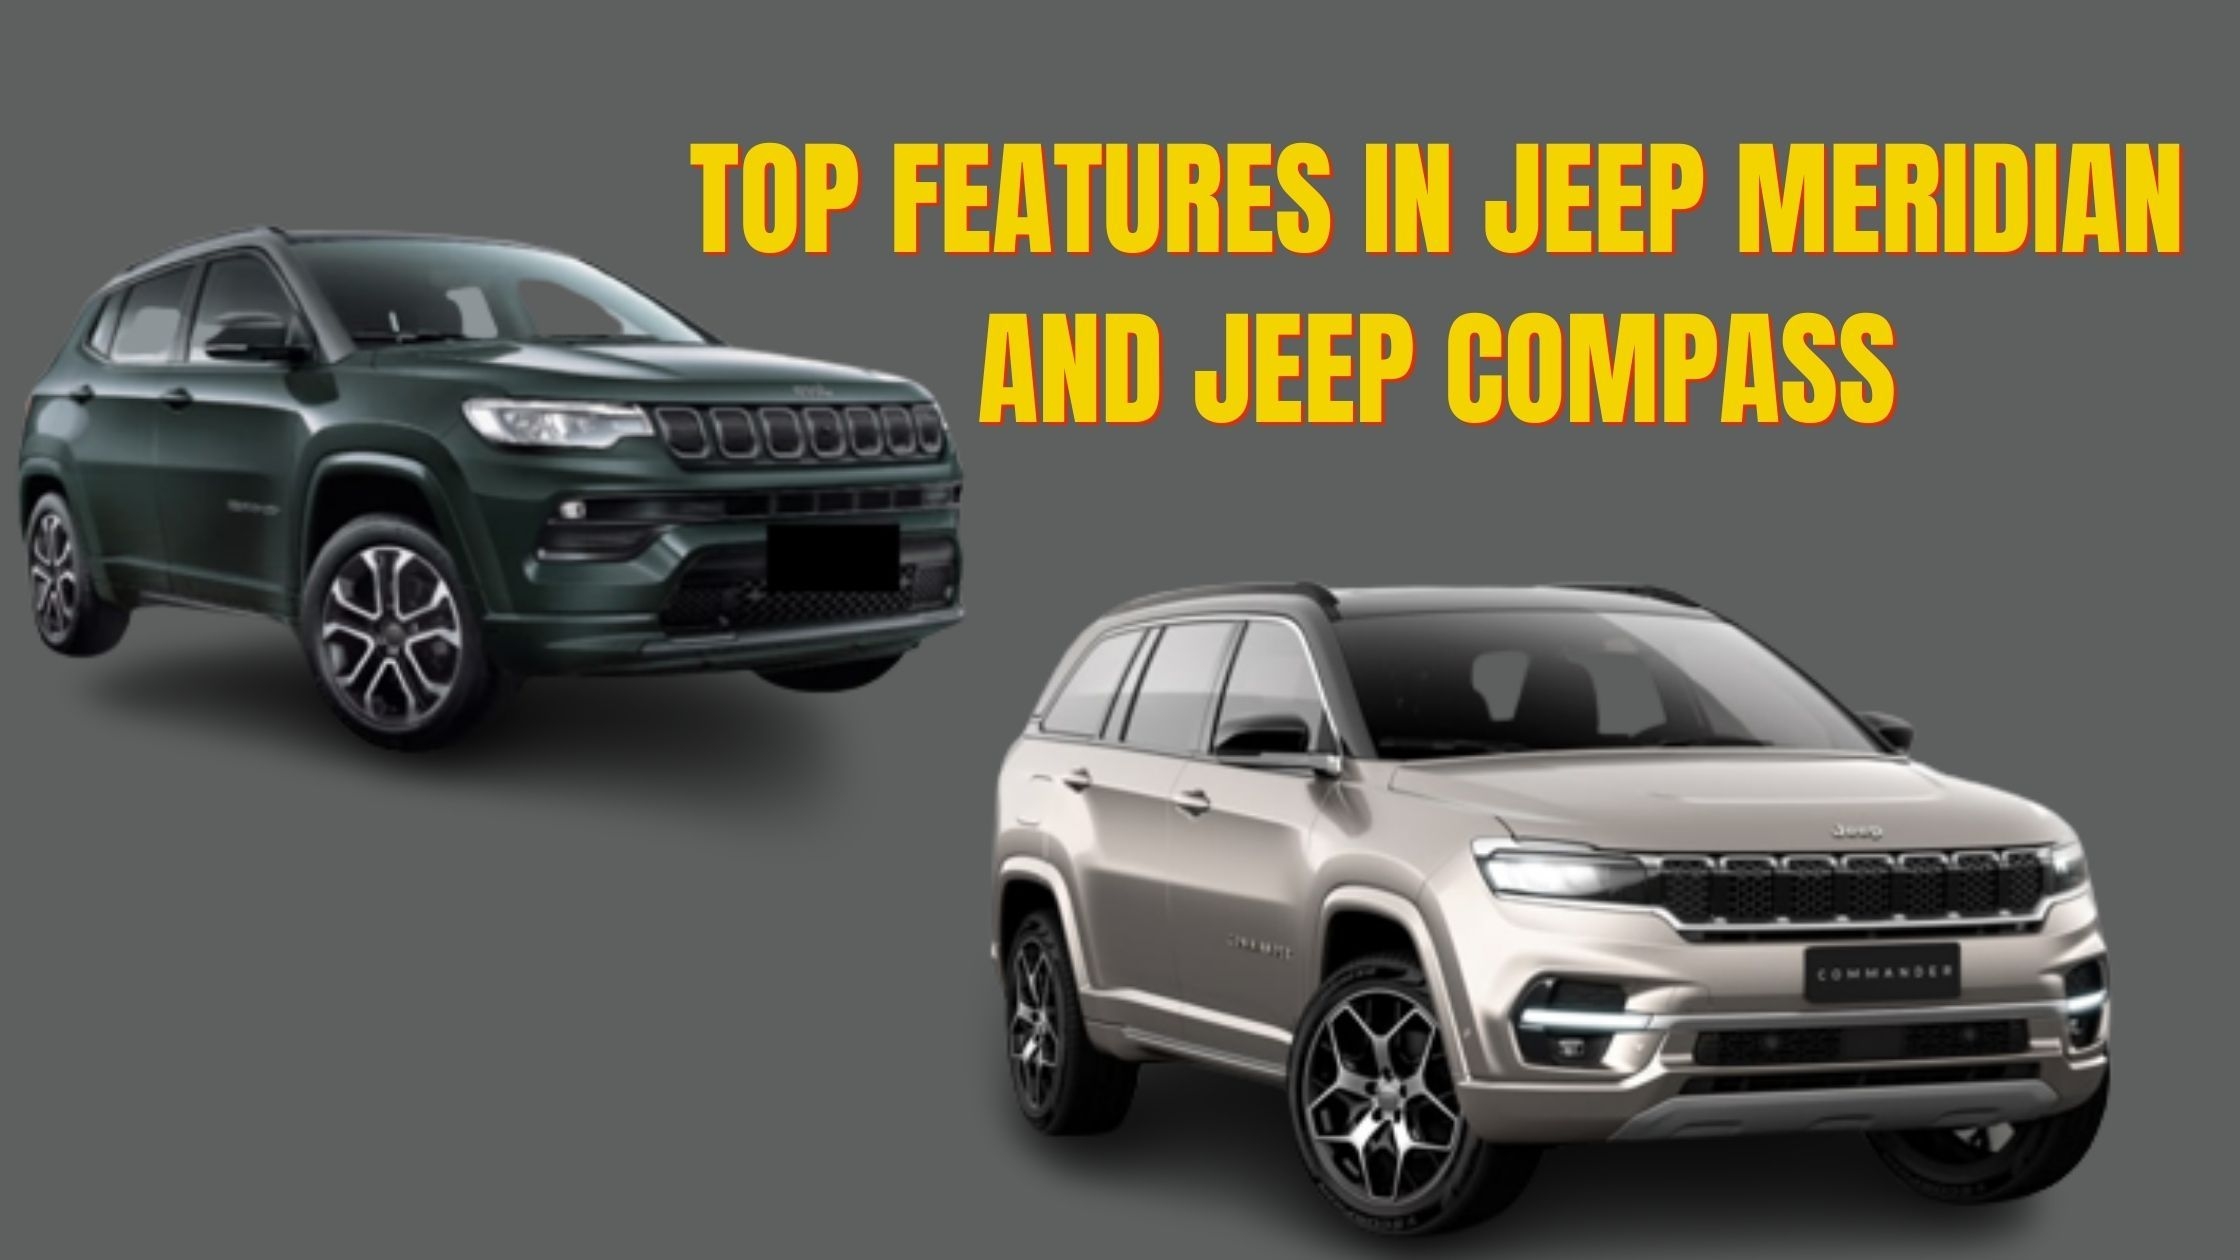 Top features in Jeep Meridian not available in Jeep Compass